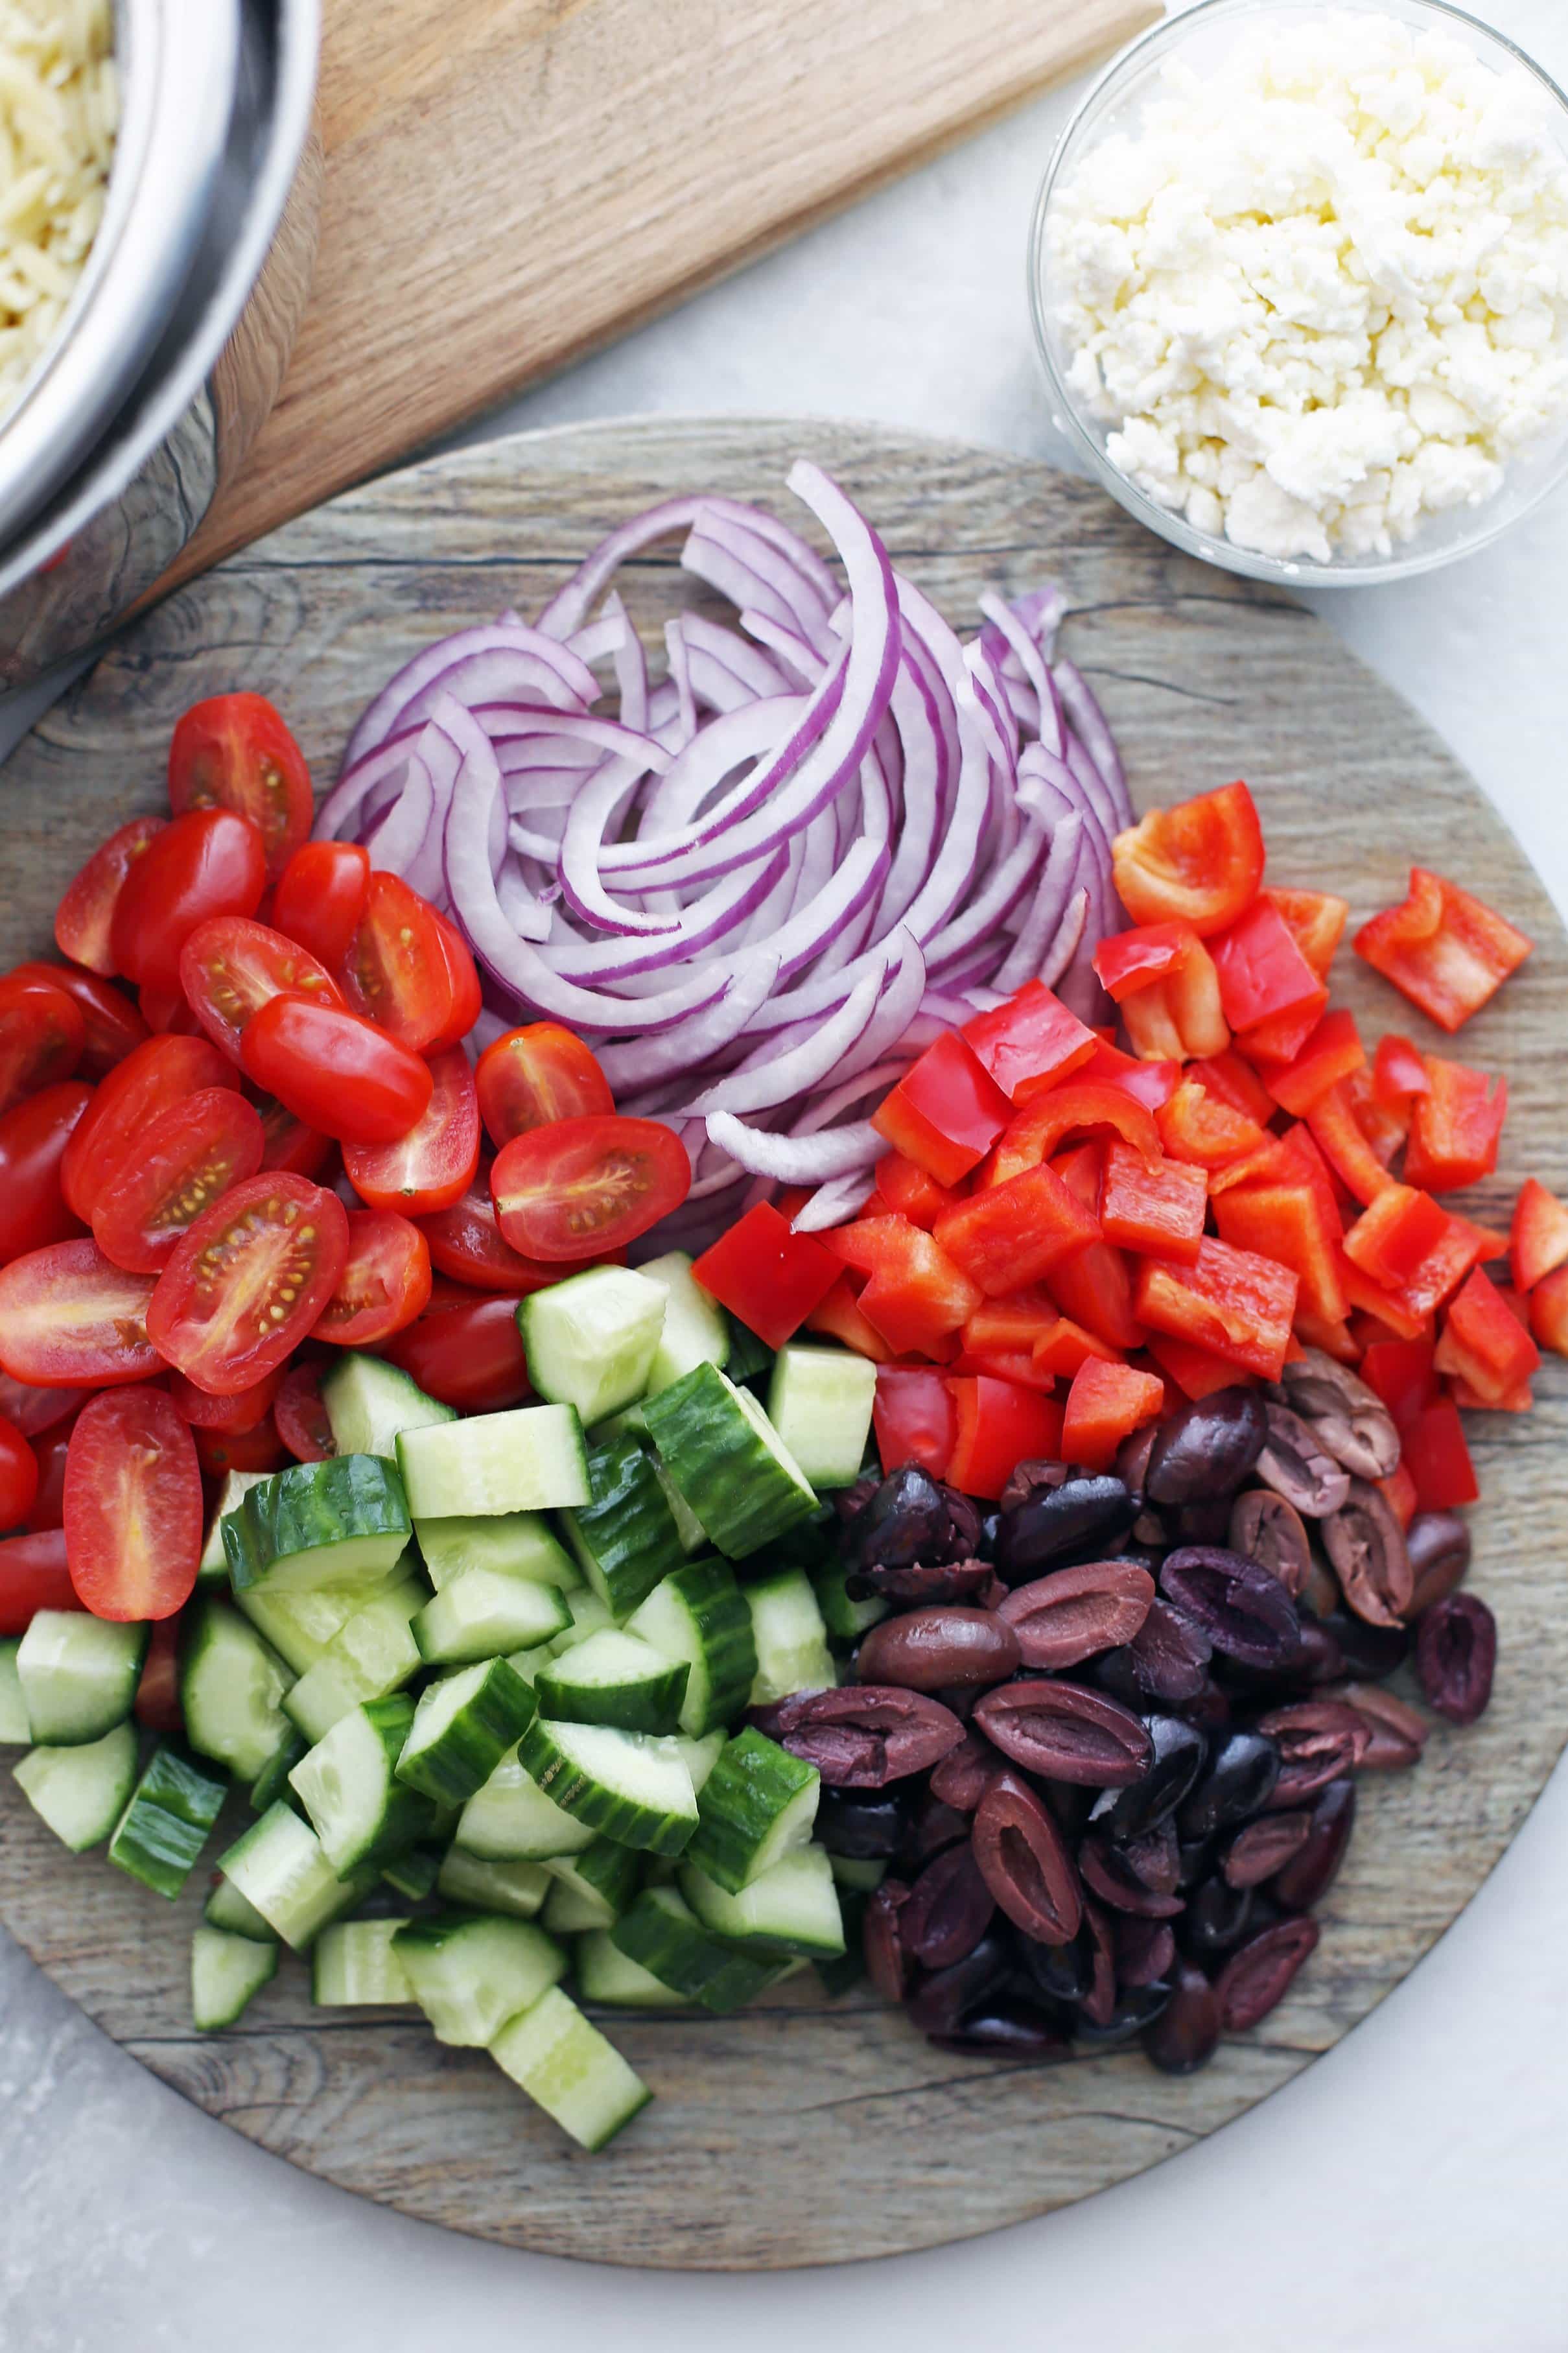 A large round wooden platter holding chopped cucumbers, grape tomatoes, red bell peppers, black olives, and red onions.